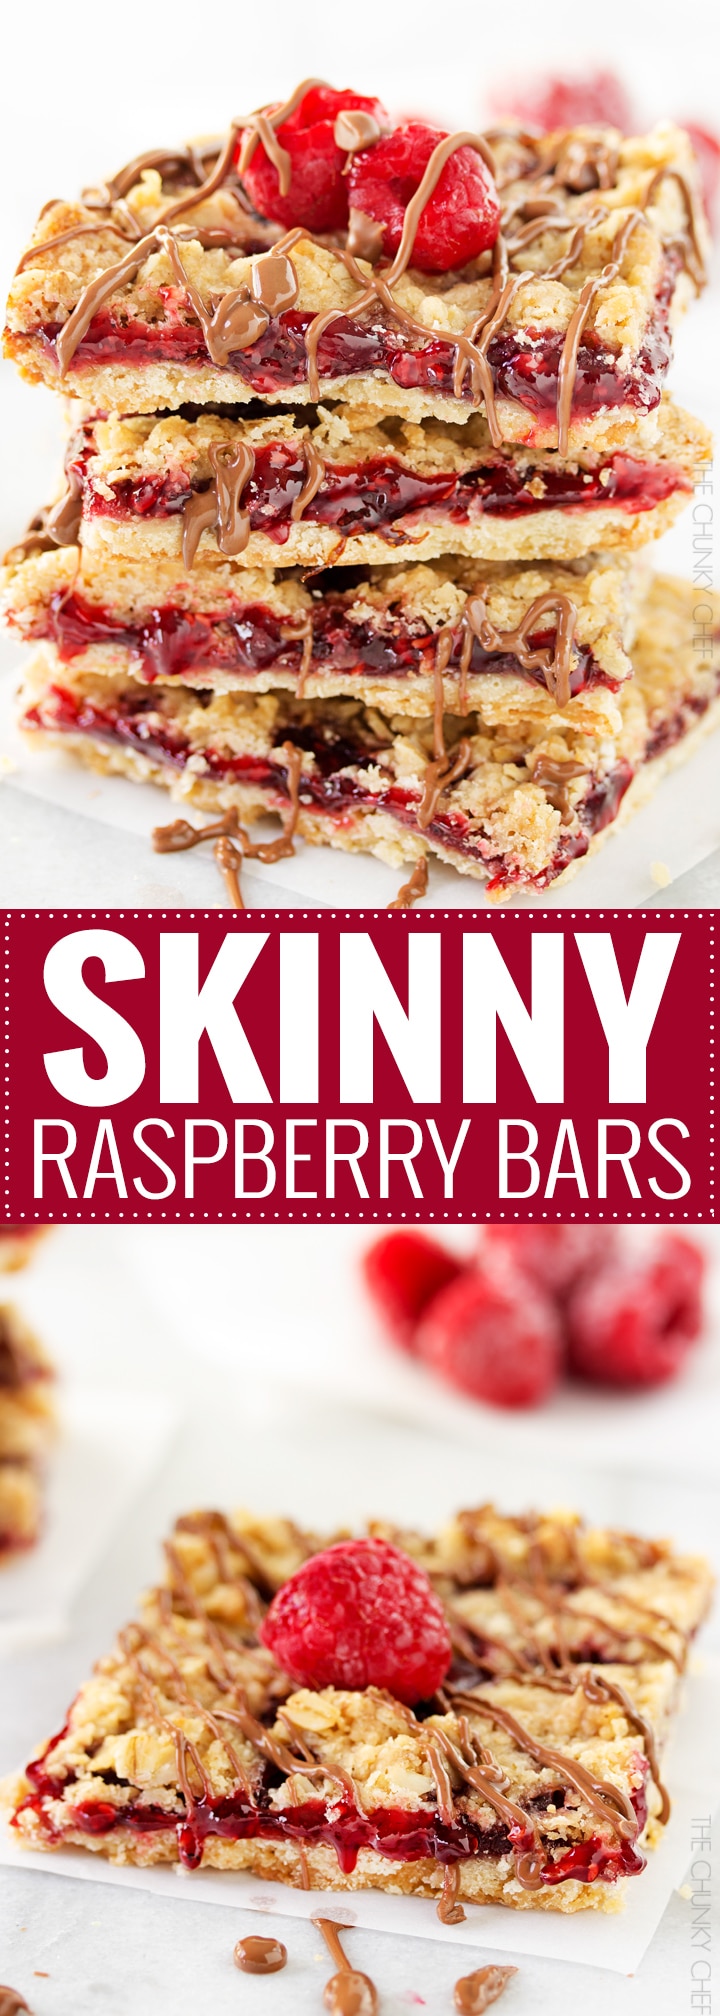 Skinny Raspberry Shortbread Bars | These buttery and sweet raspberry bars have under 200 calories per bar, making them the perfect lighter dessert! | http://thechunkychef.com